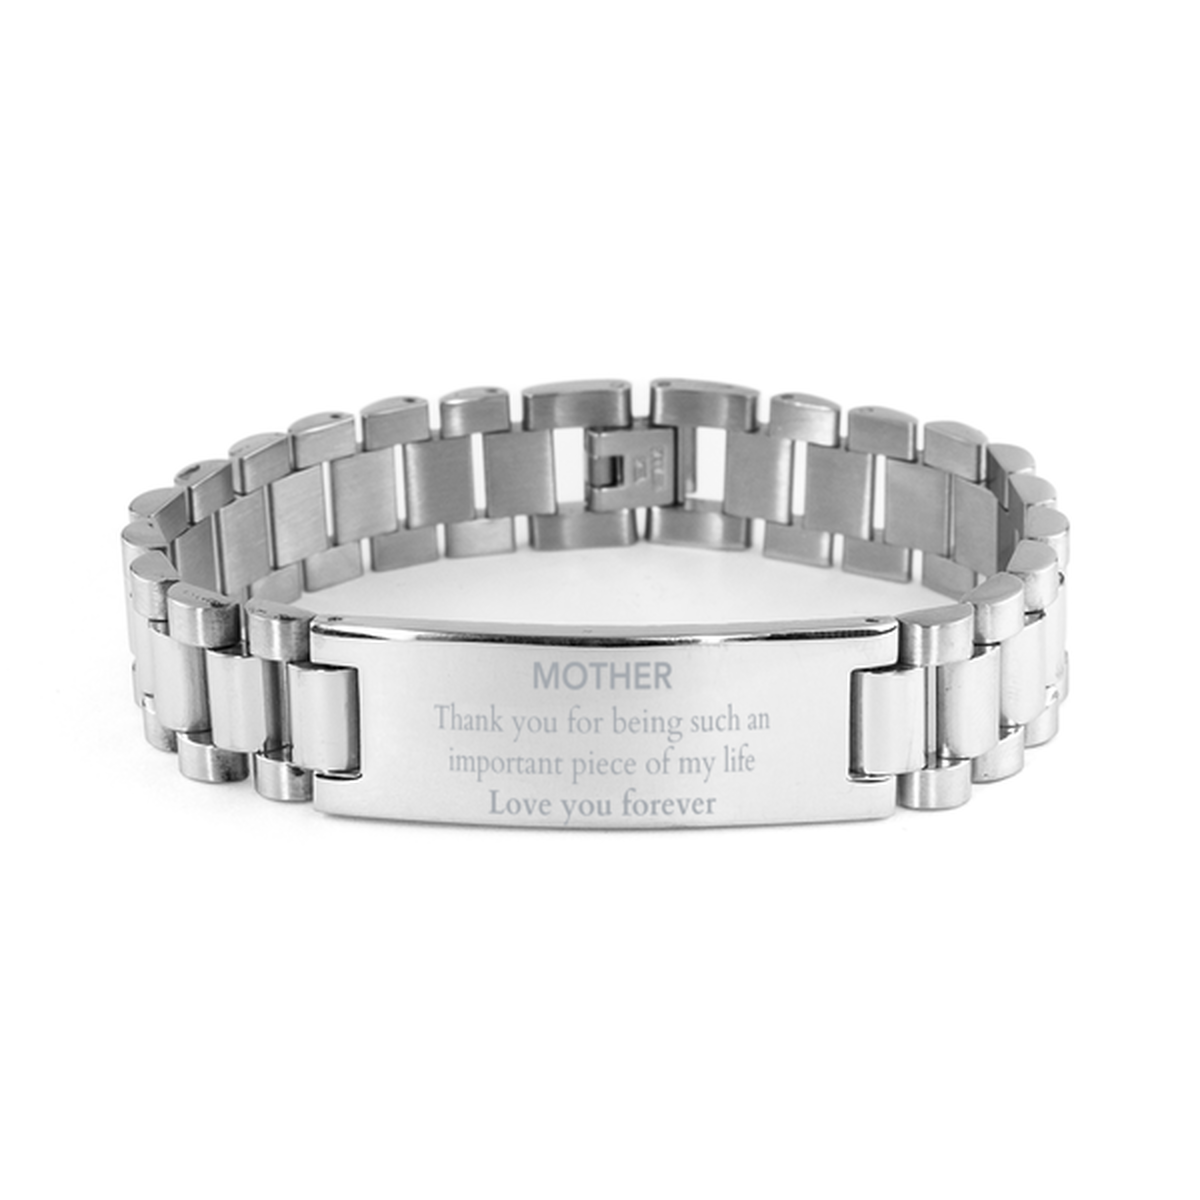 Appropriate Mother Ladder Stainless Steel Bracelet Epic Birthday Gifts for Mother Thank you for being such an important piece of my life Mother Christmas Mothers Fathers Day